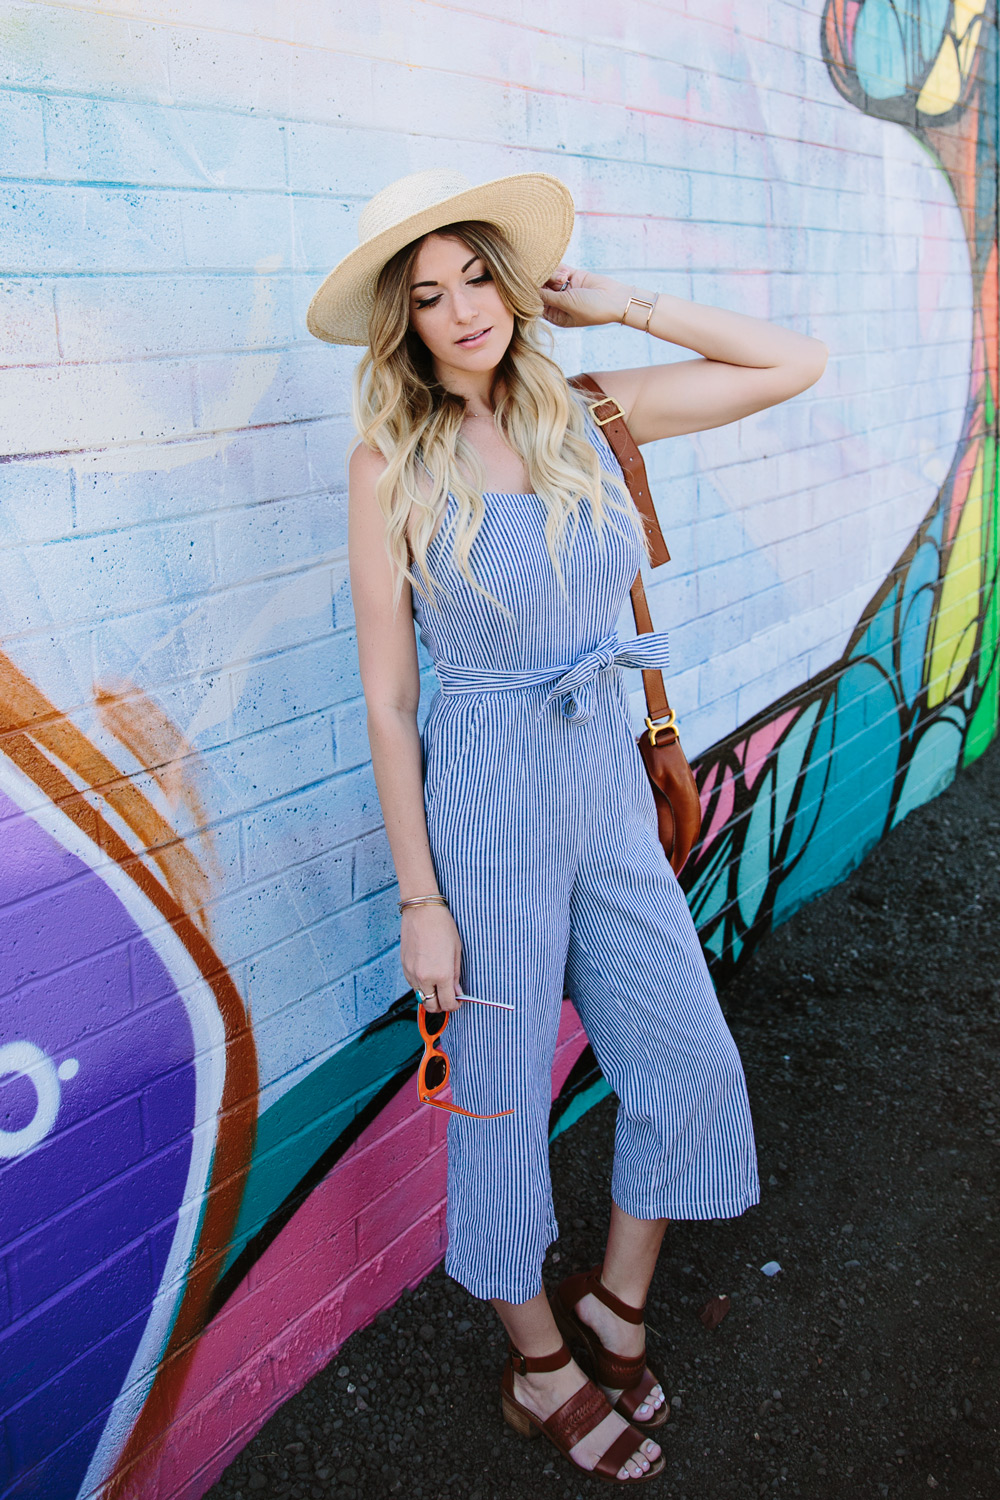 dash of darling styles a madewell stripe jumpsuit with cognac leather sandals, a chloe cross body bag and a straw boater hat for summer.